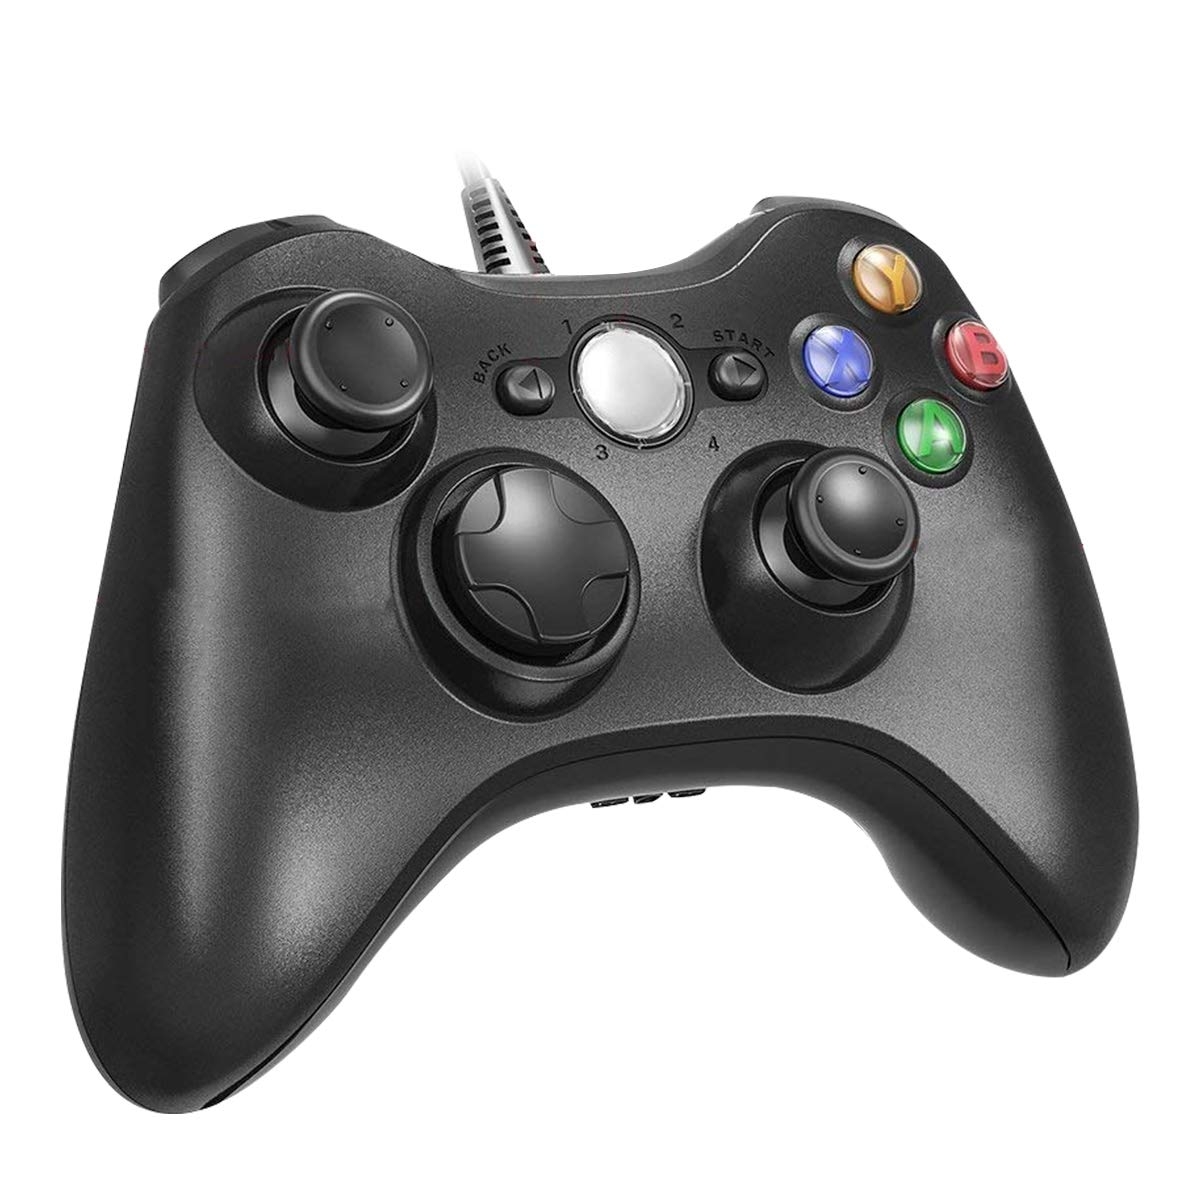 how to use xbox 360 controller on madden 08 pc